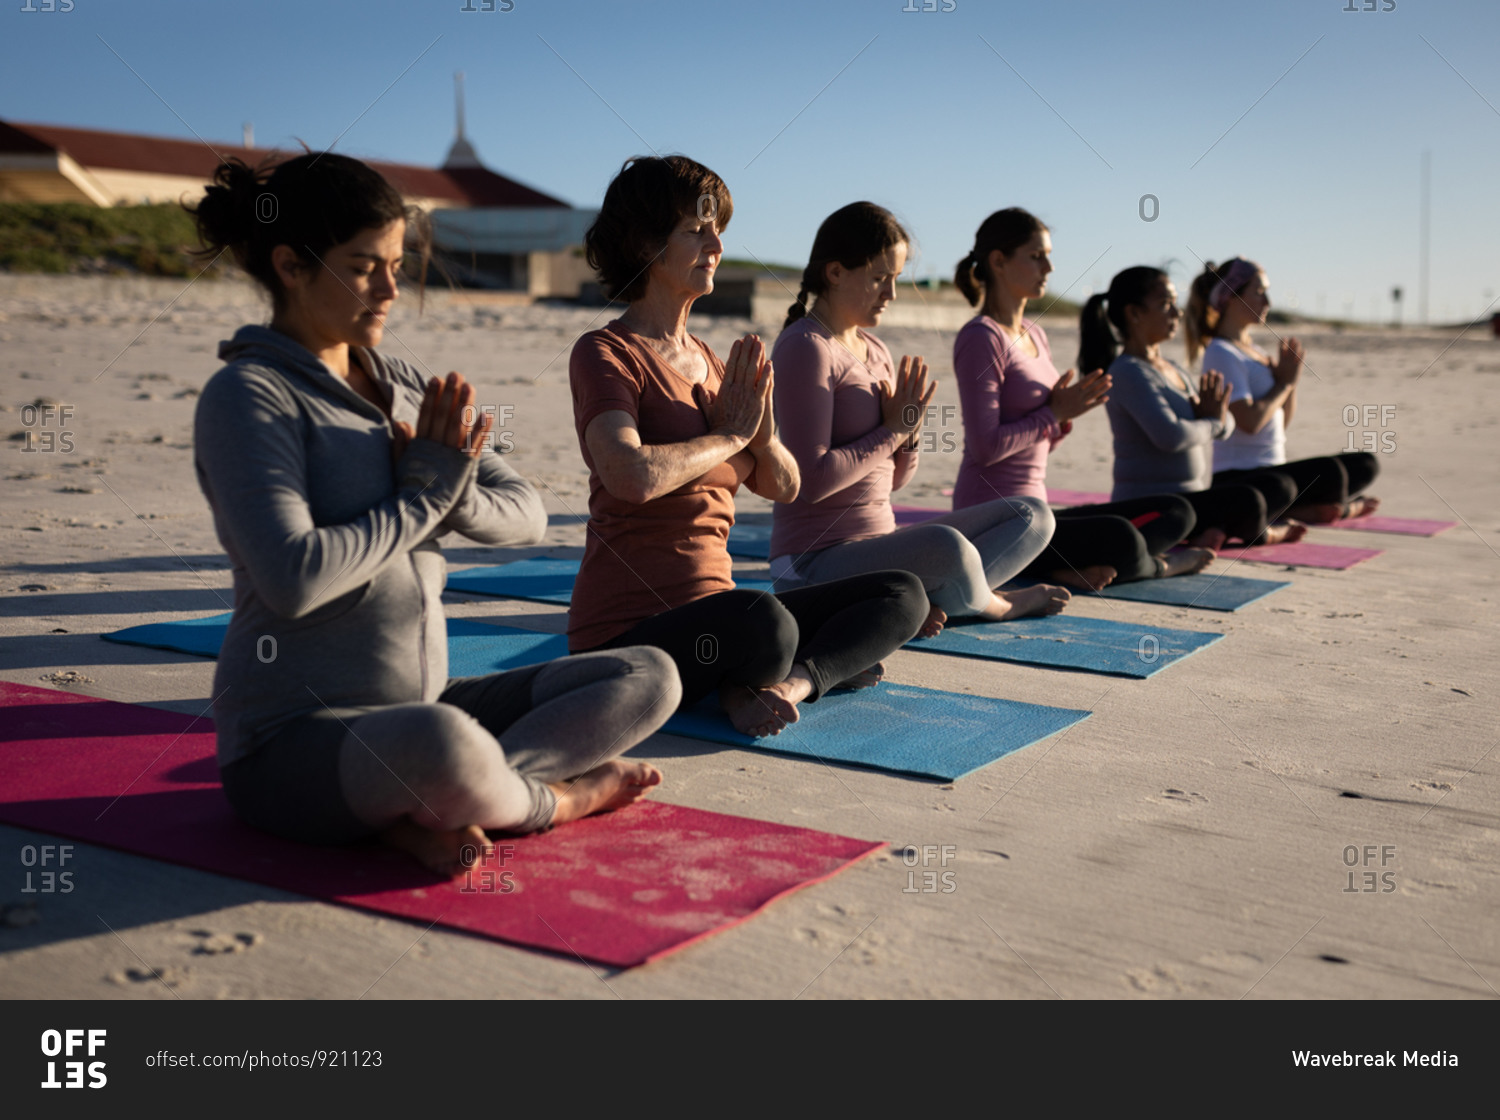 Side view of a multi-ethnic group of female friends enjoying exercising on a beach on a sunny day, practicing yoga sitting in a row in a yoga position, meditating with closed eyes and hands in prayer position.